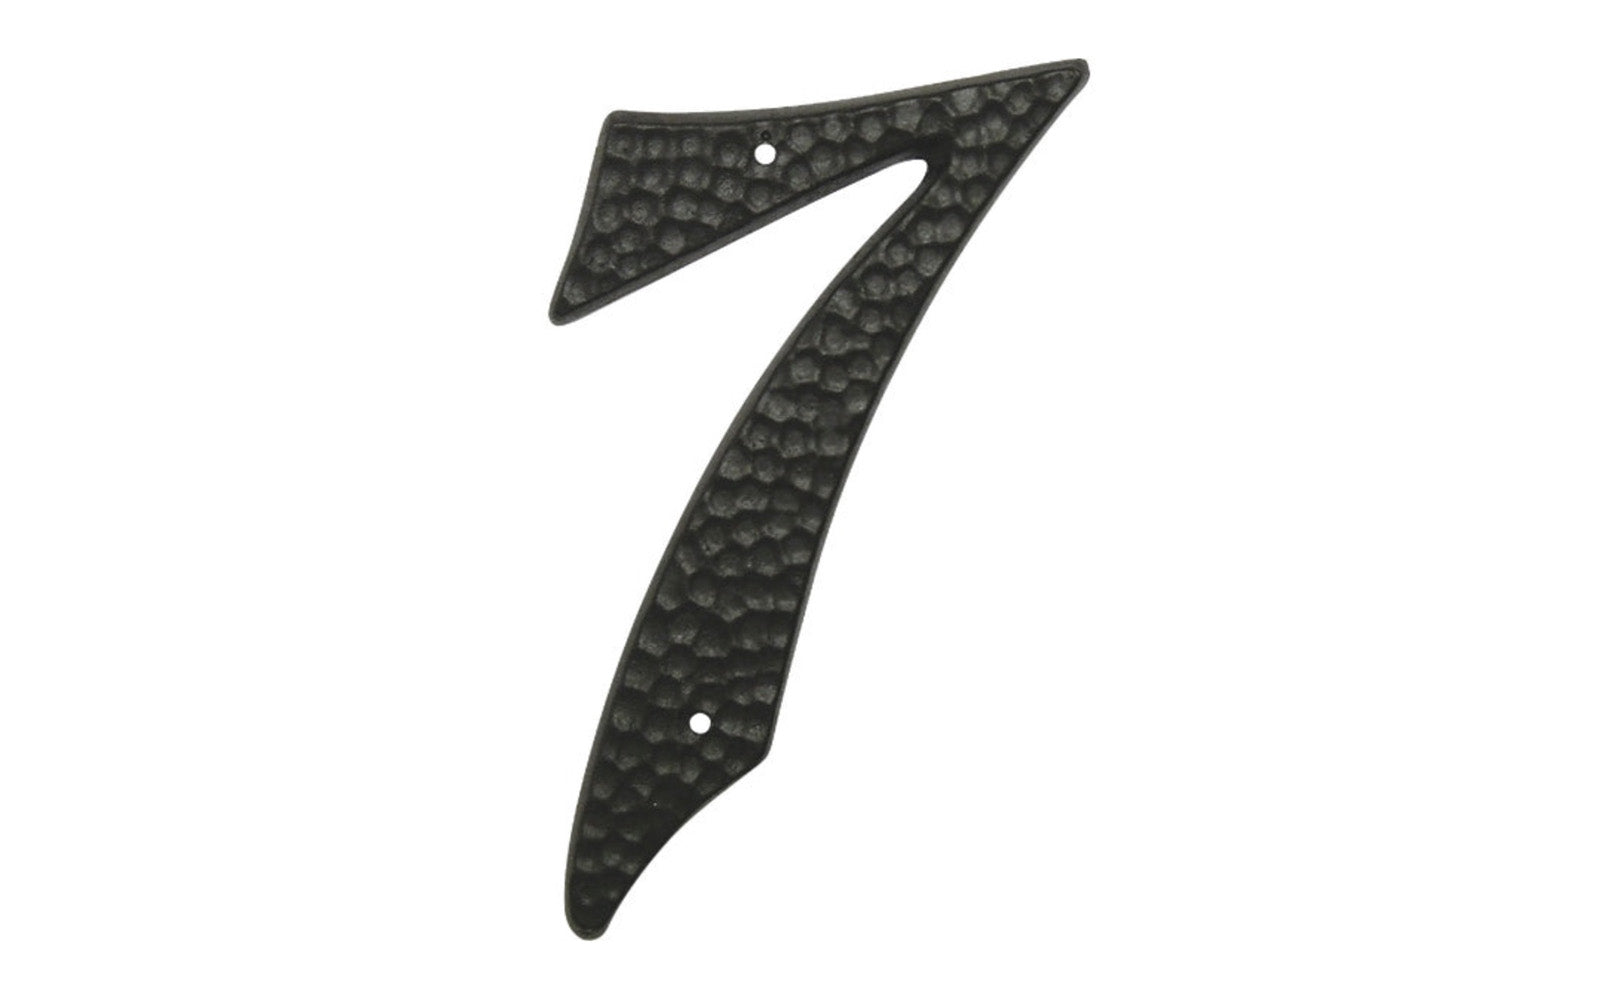 Number Seven Black Hammered House Number in a 3-1/2" Size. Made of die-cast aluminum material with a black hammered style. Mounting nails included. #7 House Number. Hy-Ko Model No. DC-3/7. 029069201074